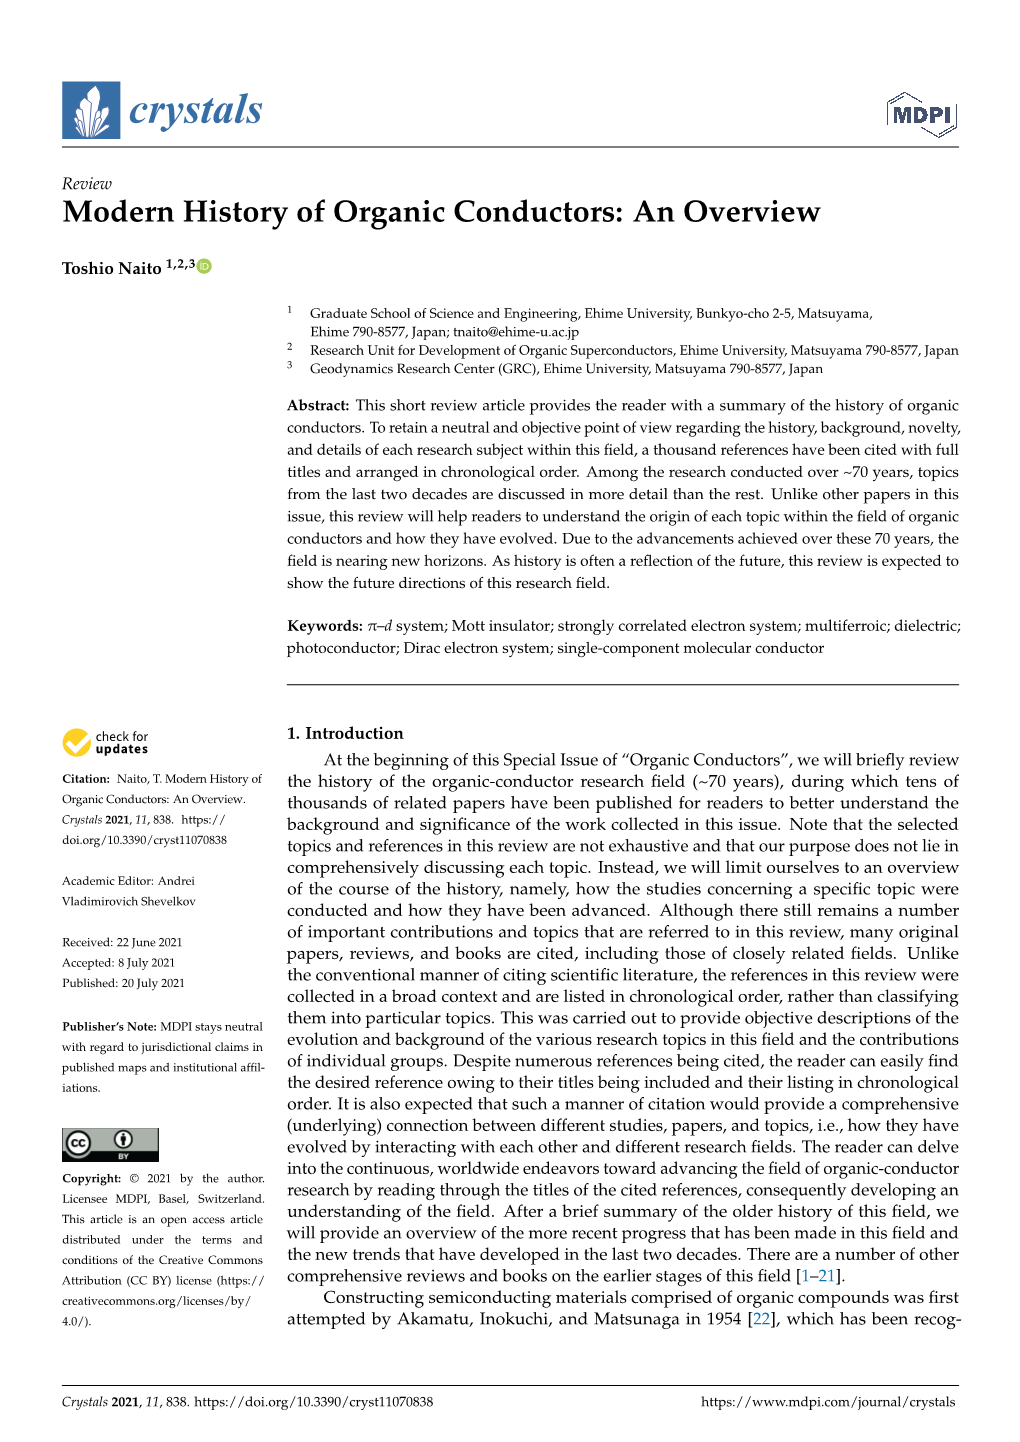 Modern History of Organic Conductors: an Overview